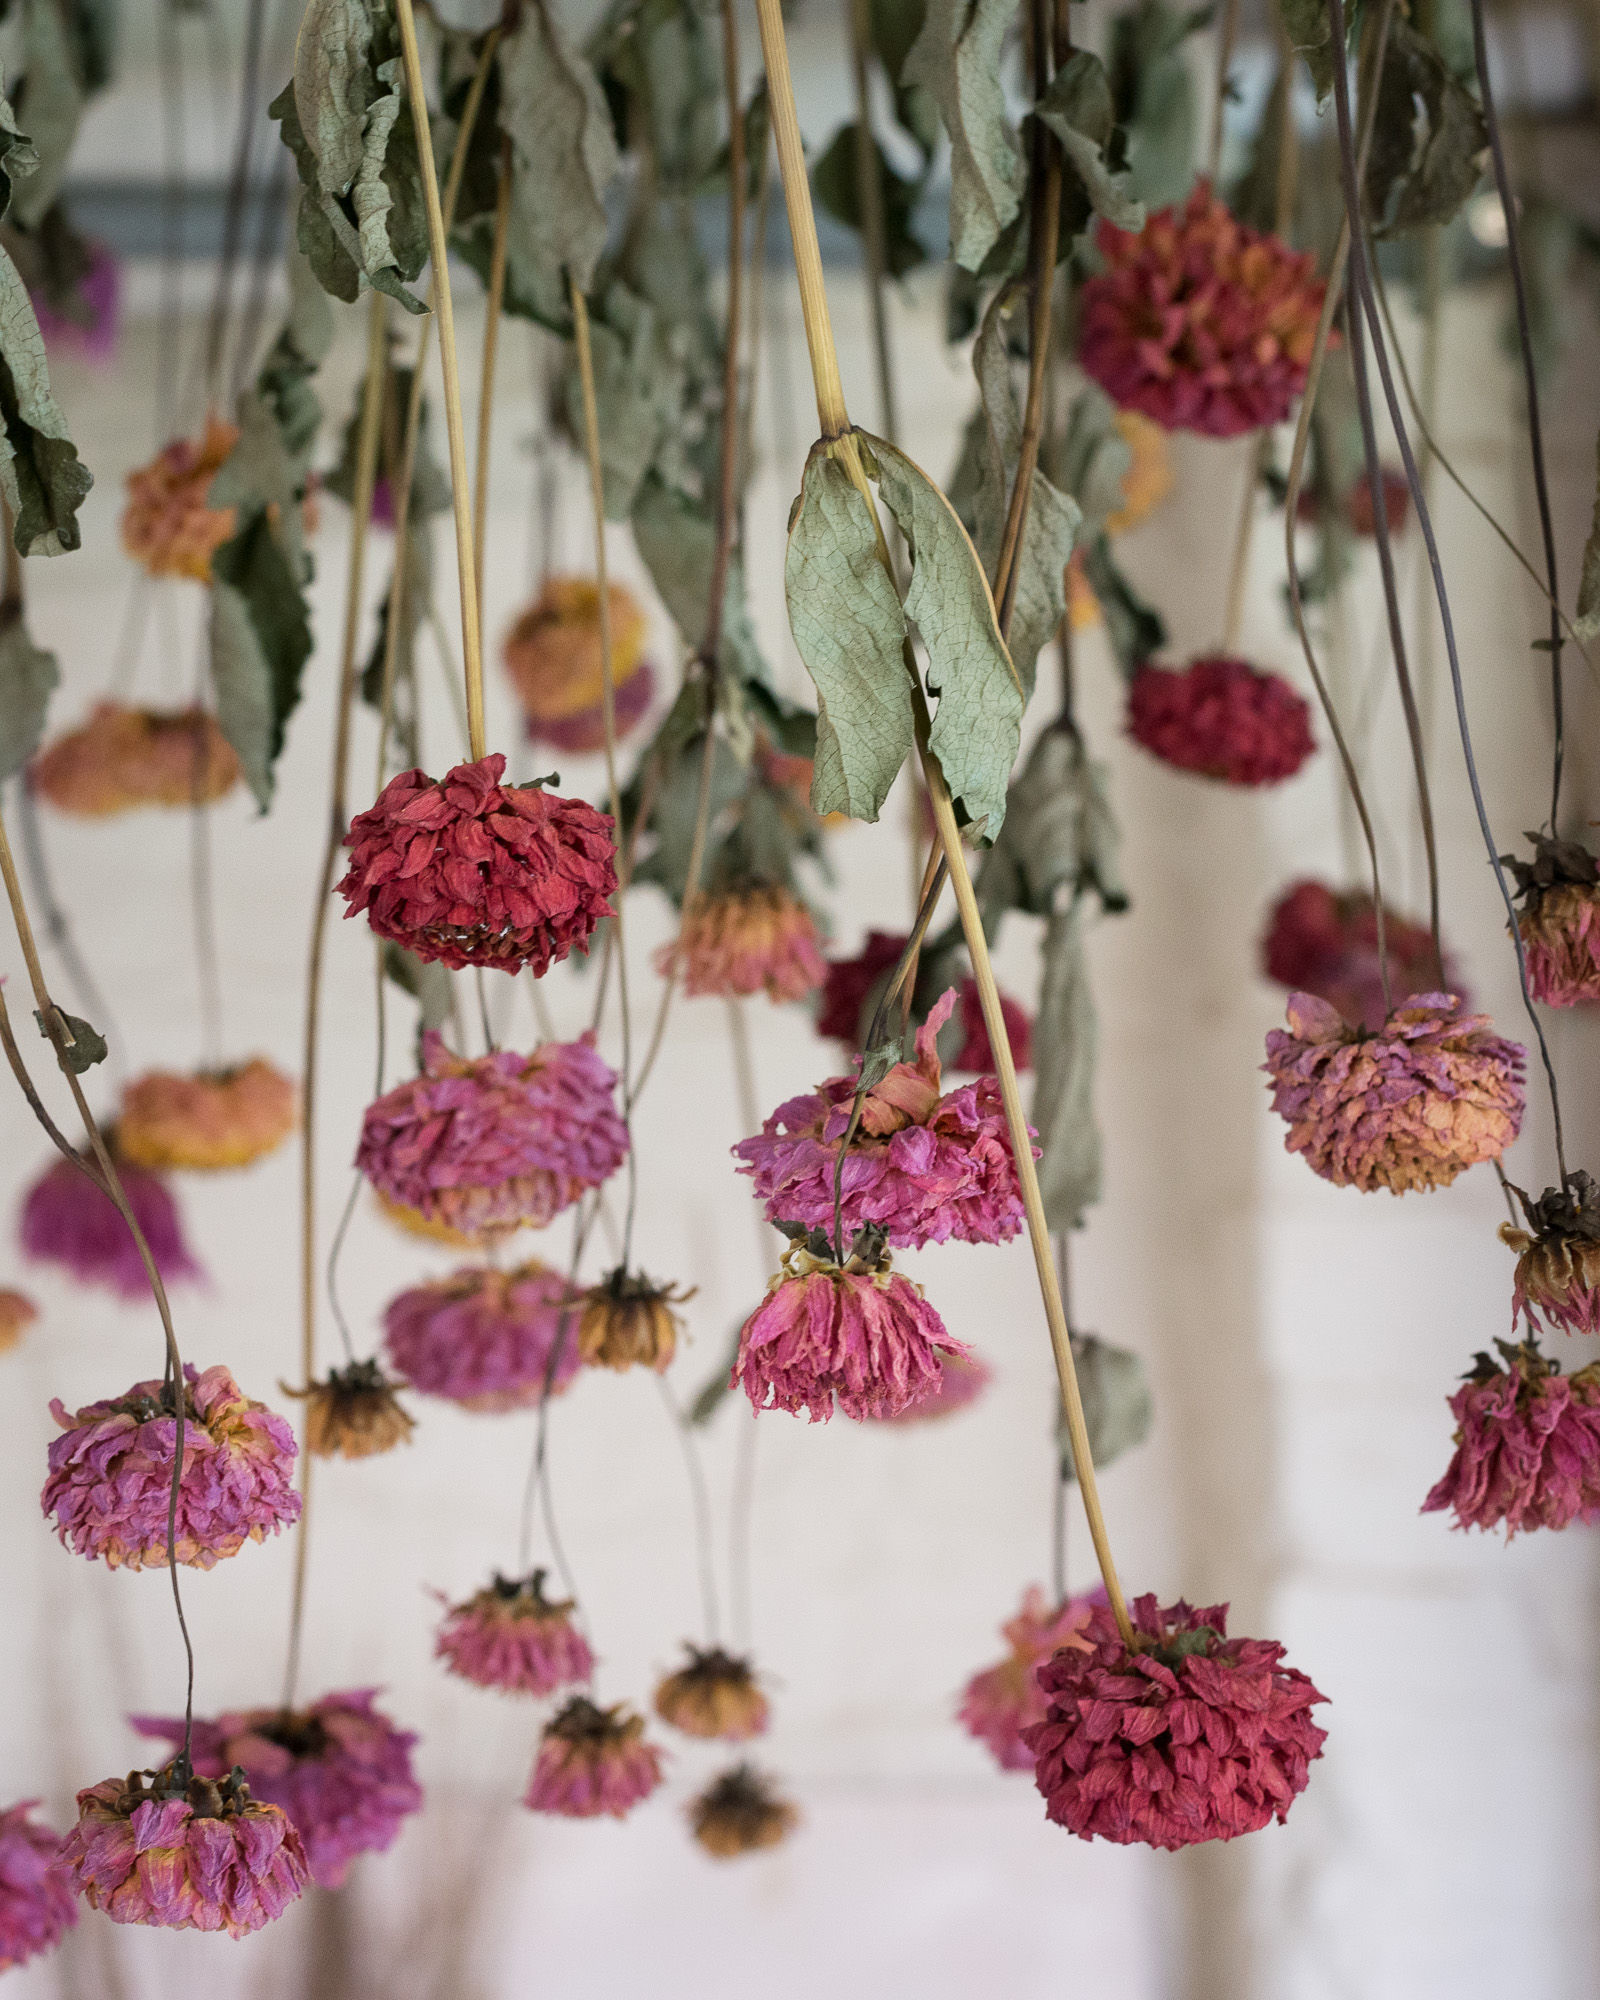 Drying flowers course